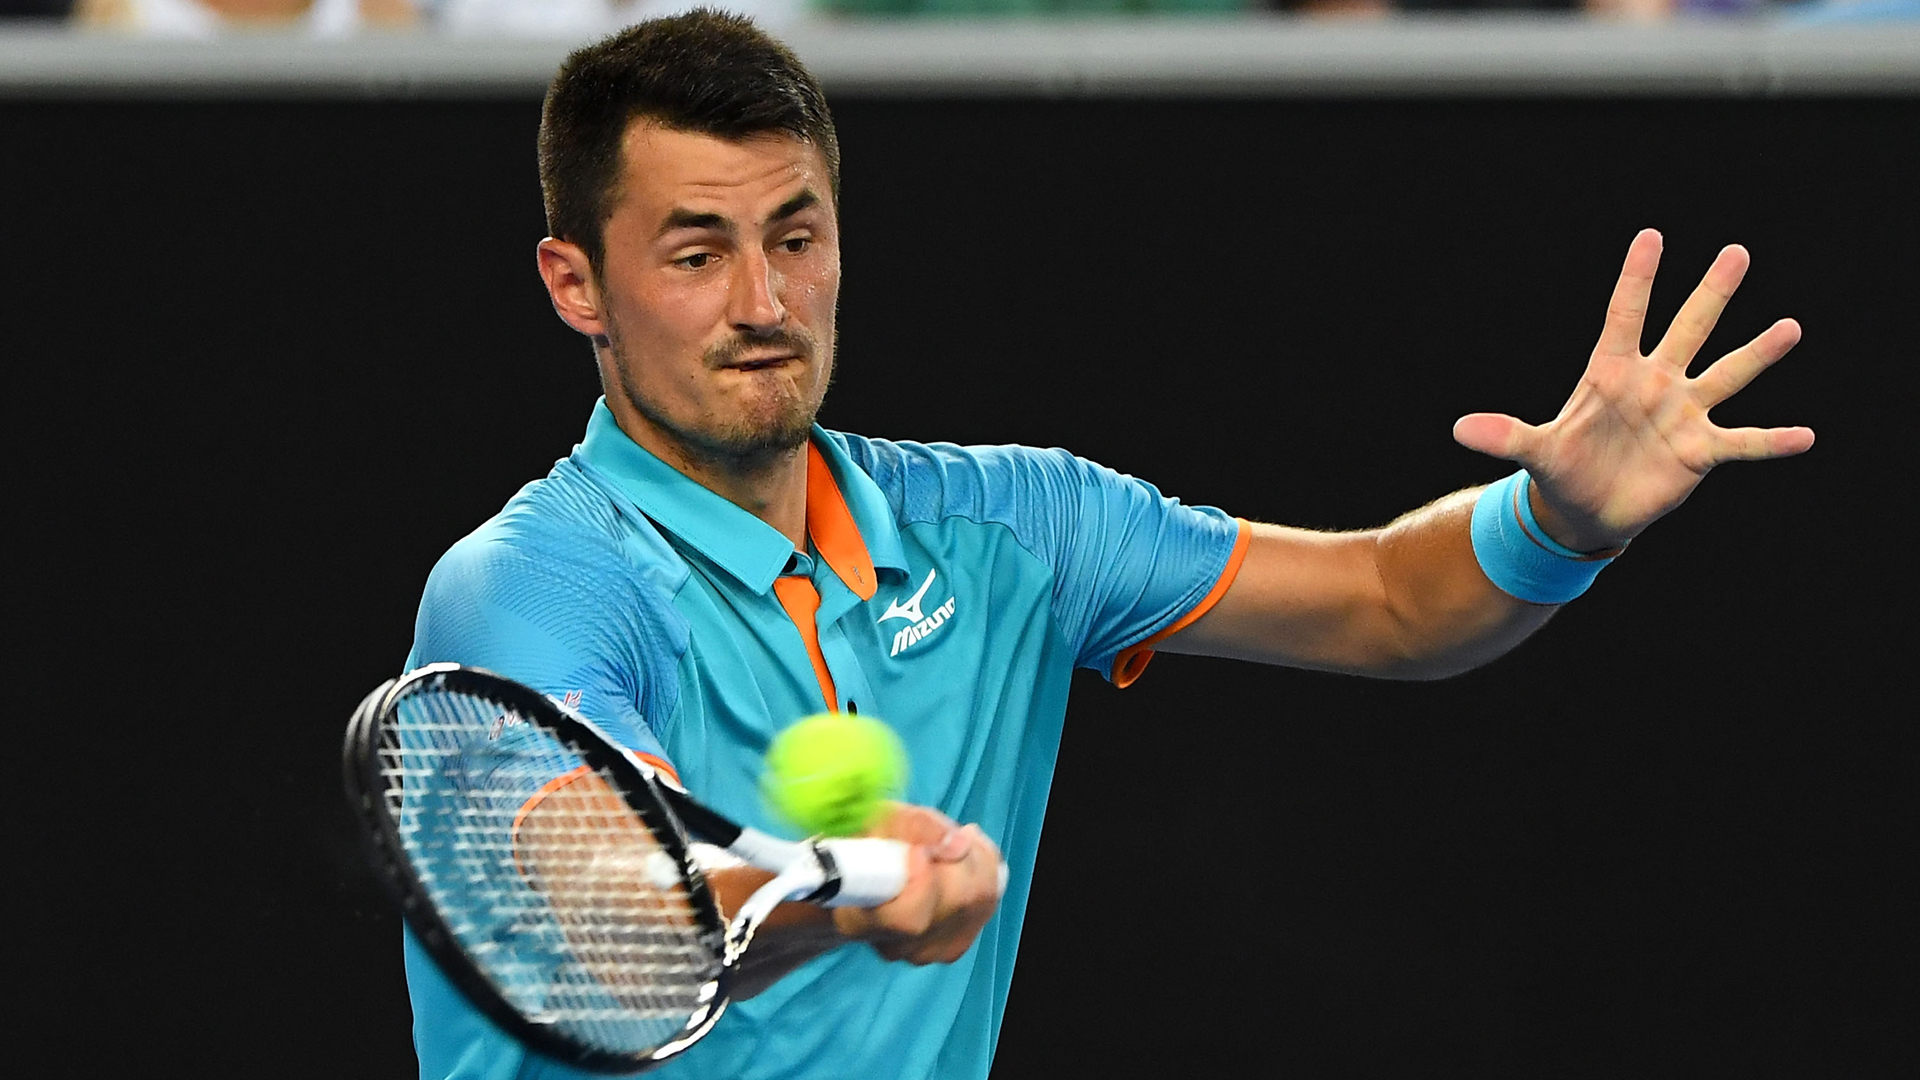 There were contrasting fortunes for Bernard Tomic and Tennys Sandgren at the New York Open.